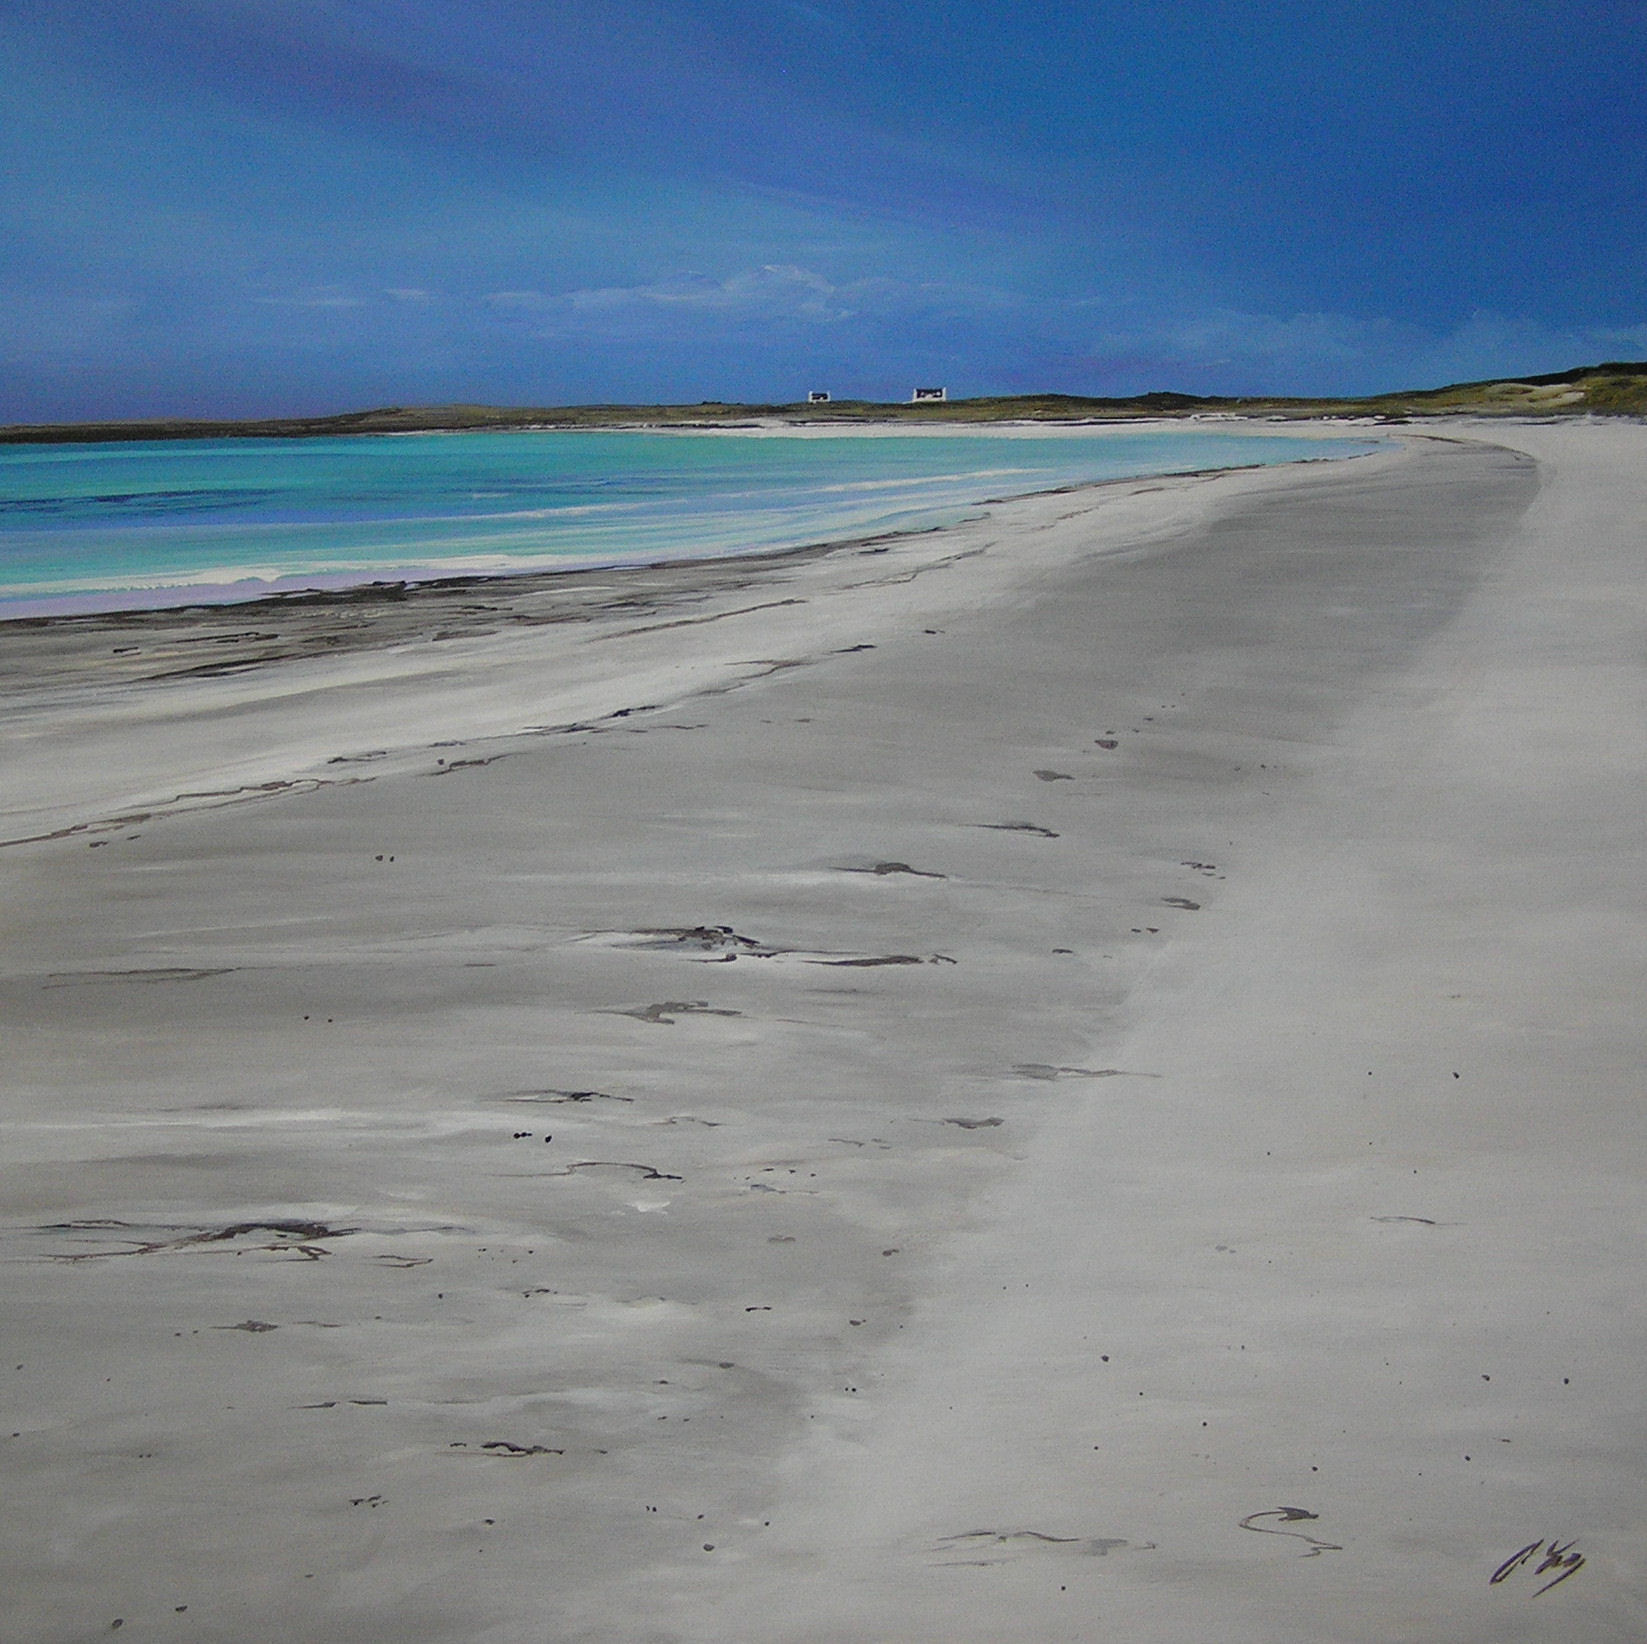 'Two Cottages, Tiree' by artist Allison Young